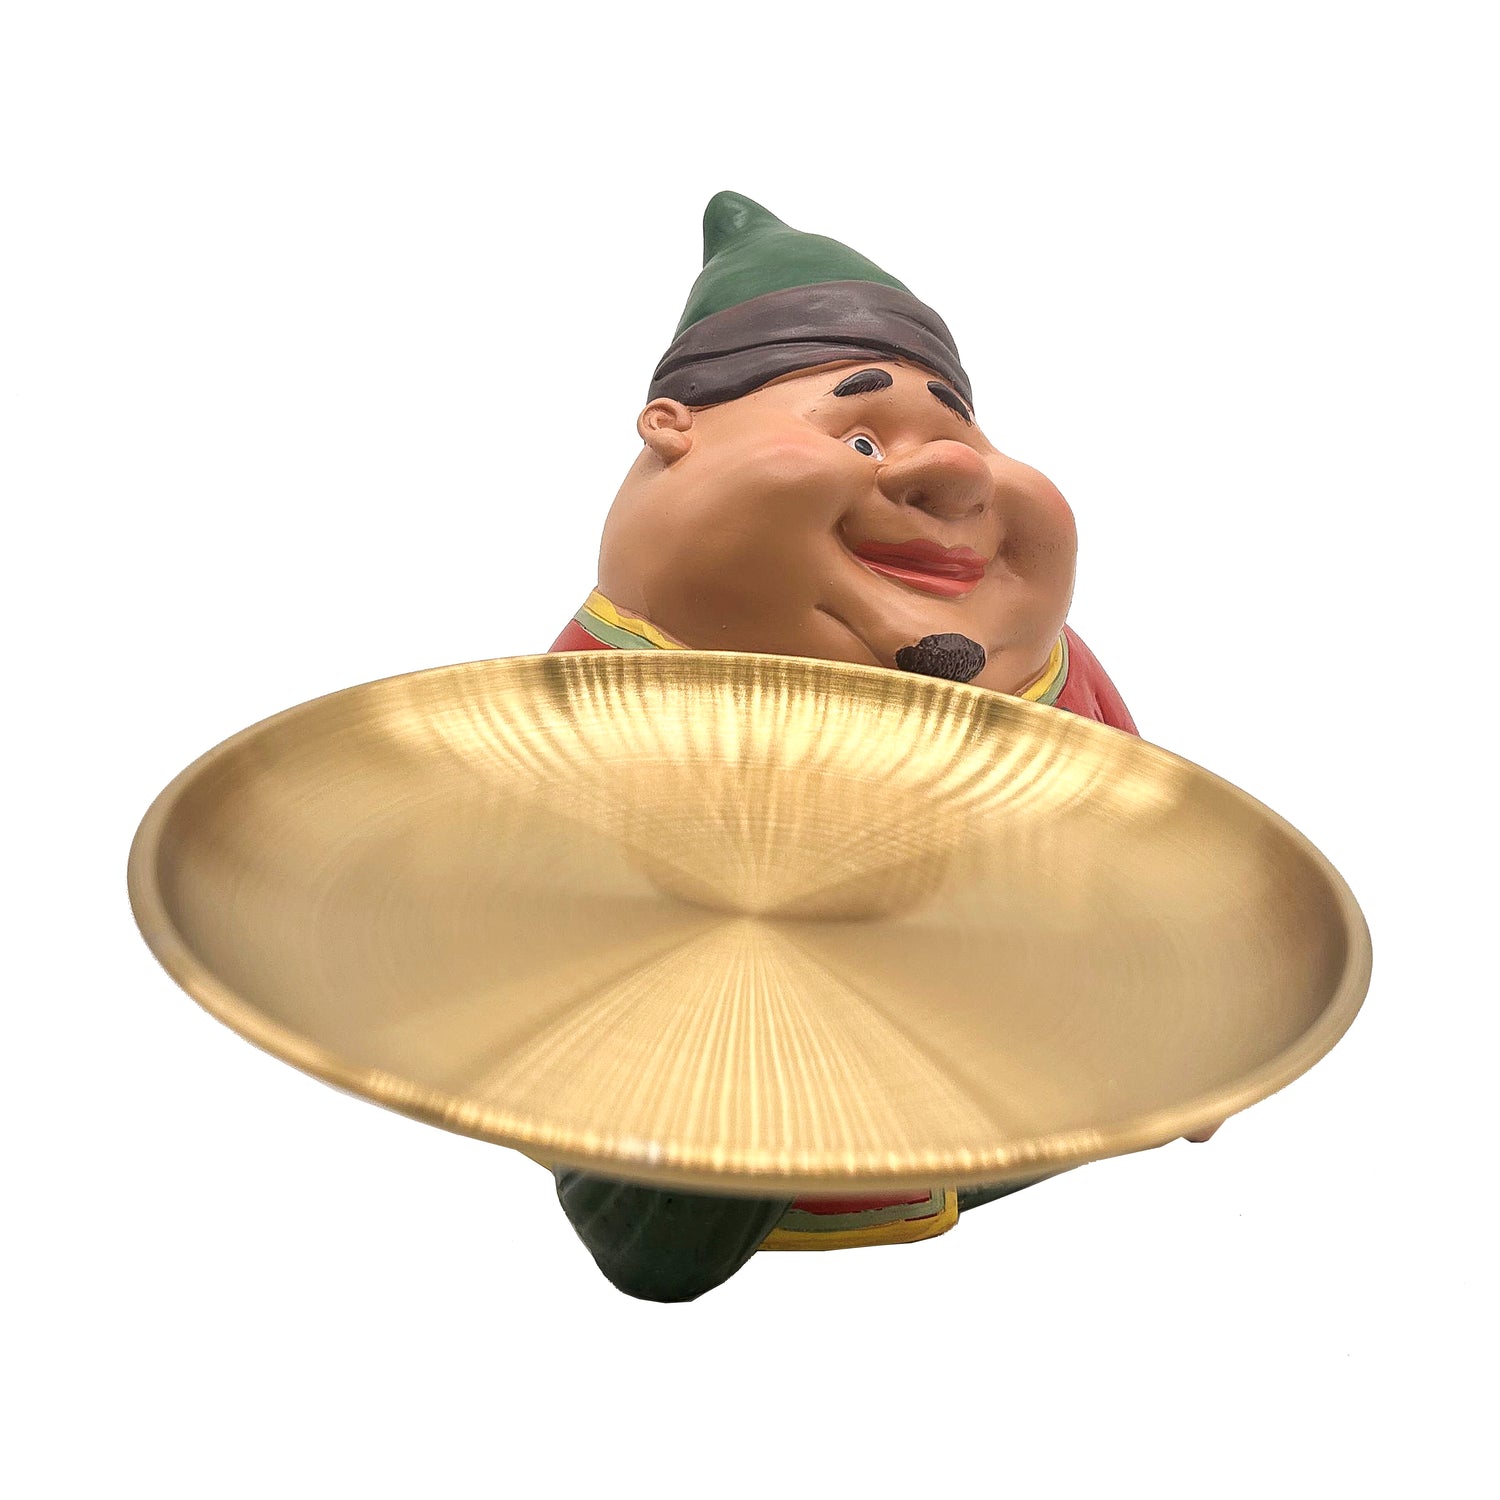 Fananees characters - Fat lovable man holding presenting plate